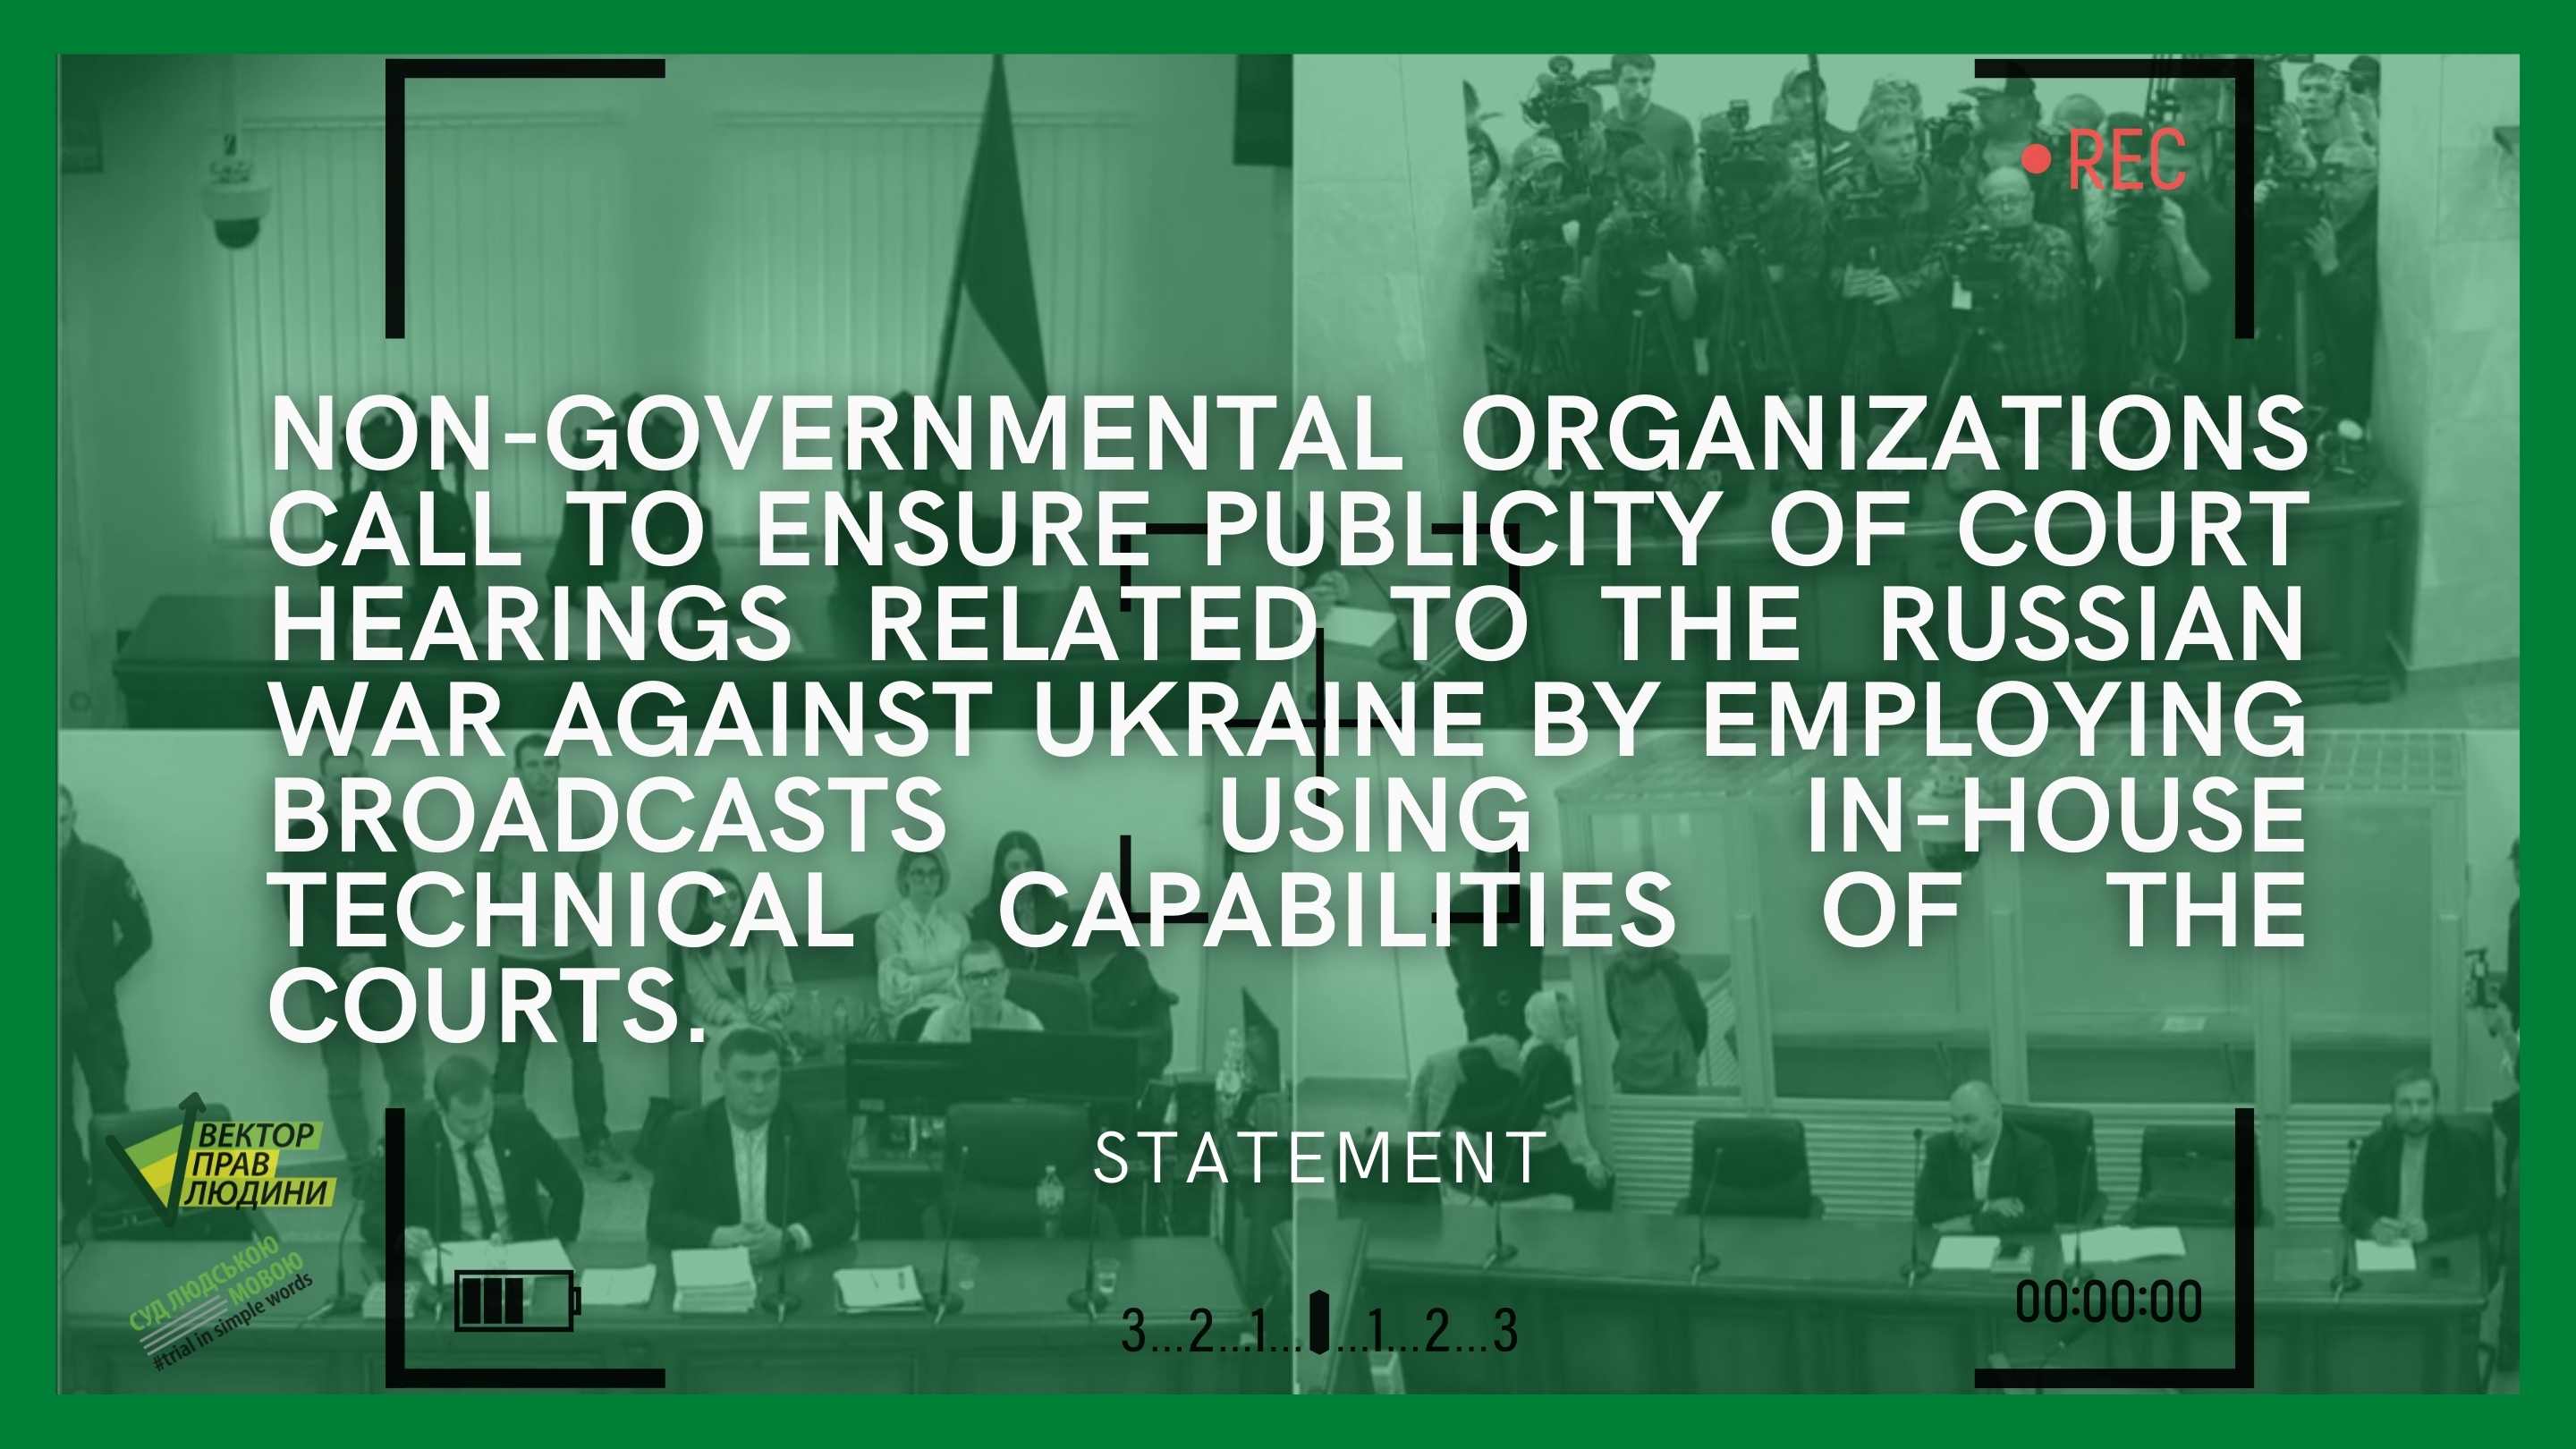 Non-governmental organizations call to ensure publicity of court hearings related to the Russian war against Ukraine